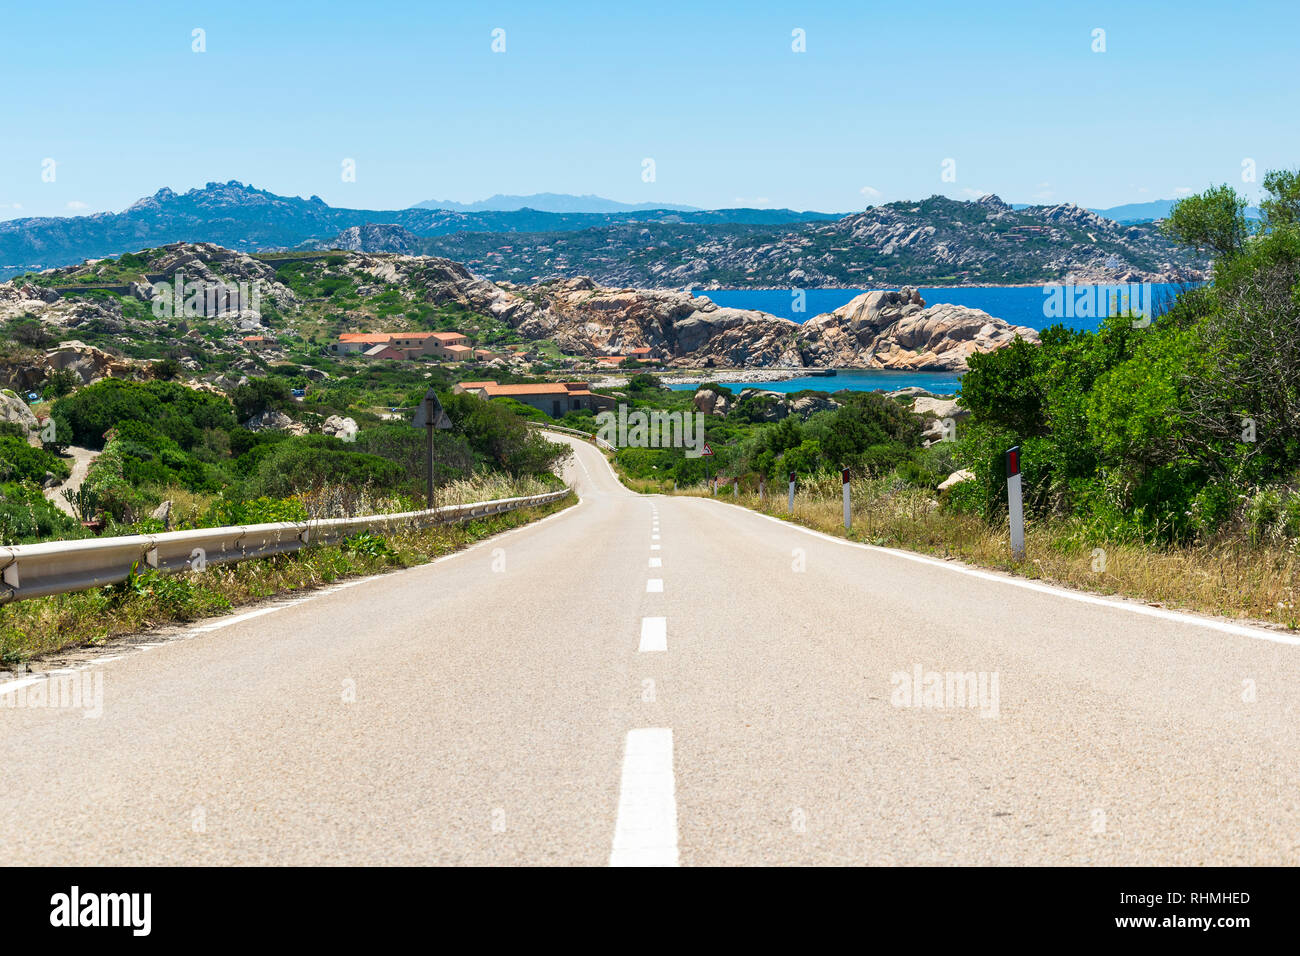 Asphalt empy road surrounded by rocky environment and turquoise sea on the beautiful island of la maddalena, italy Stock Photo